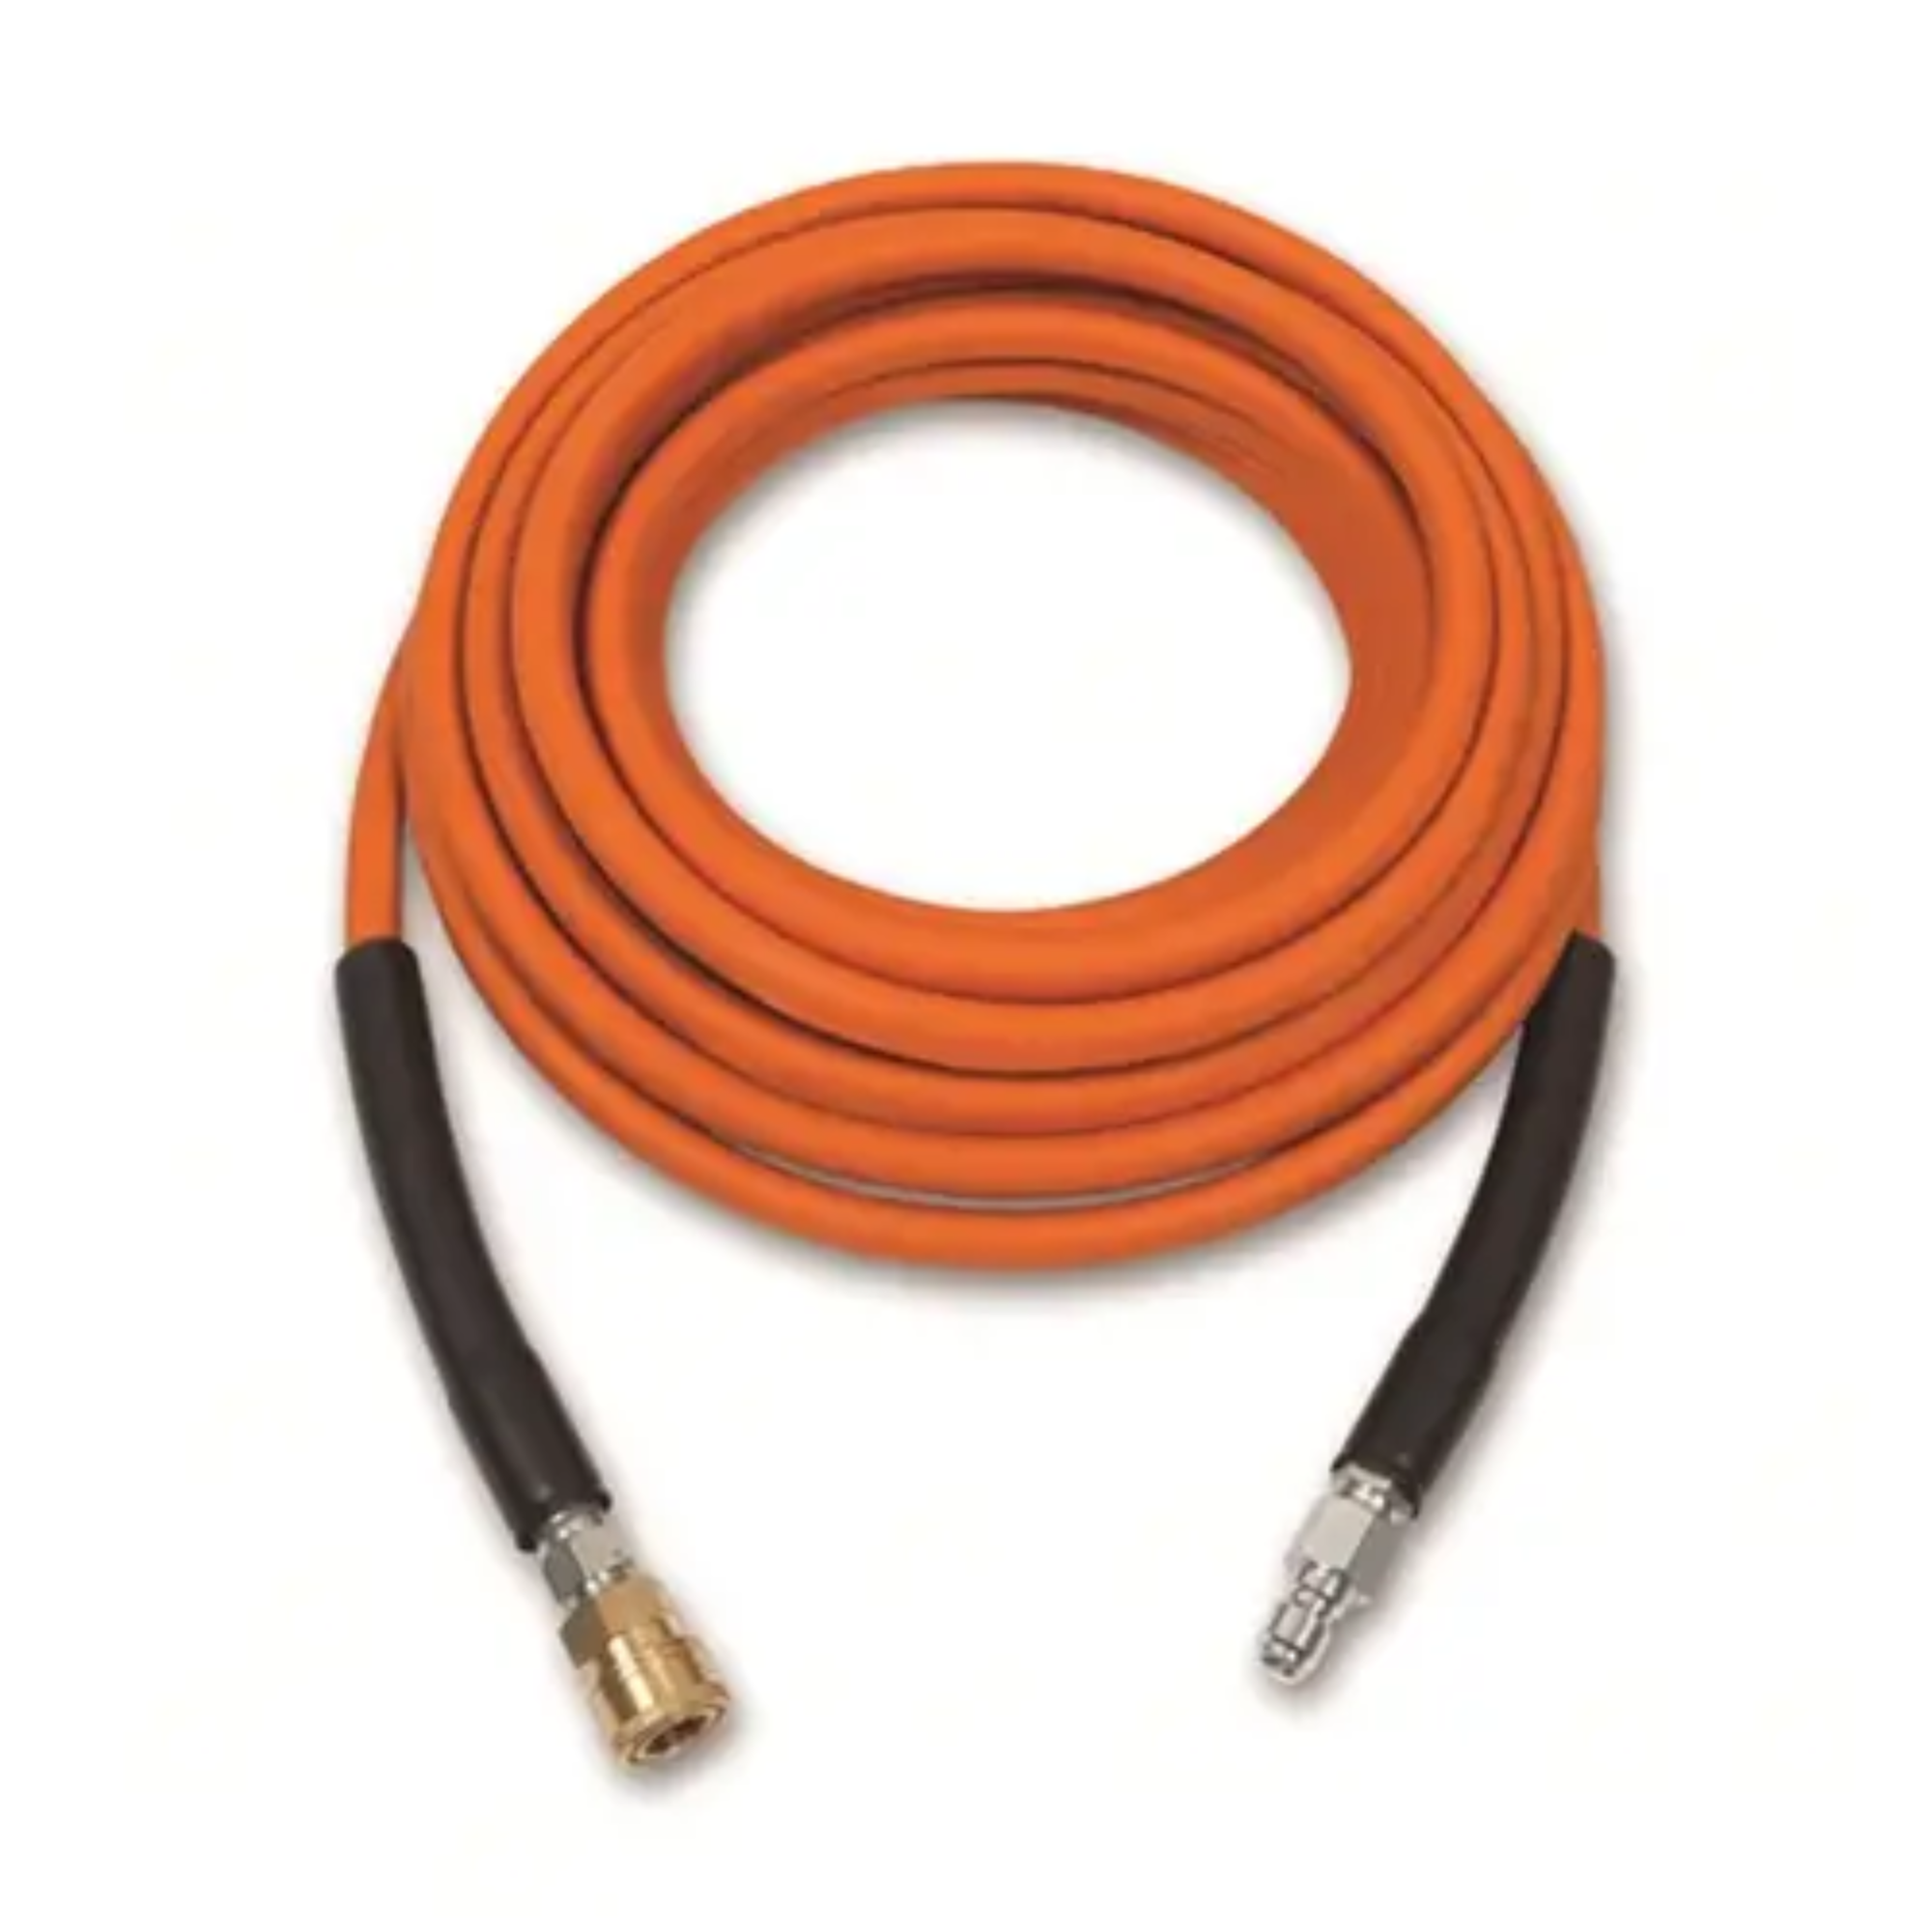 STIHL Pressure Washer Replacement/EXT 40FT Hose | For RB600 | 4925 500 0809